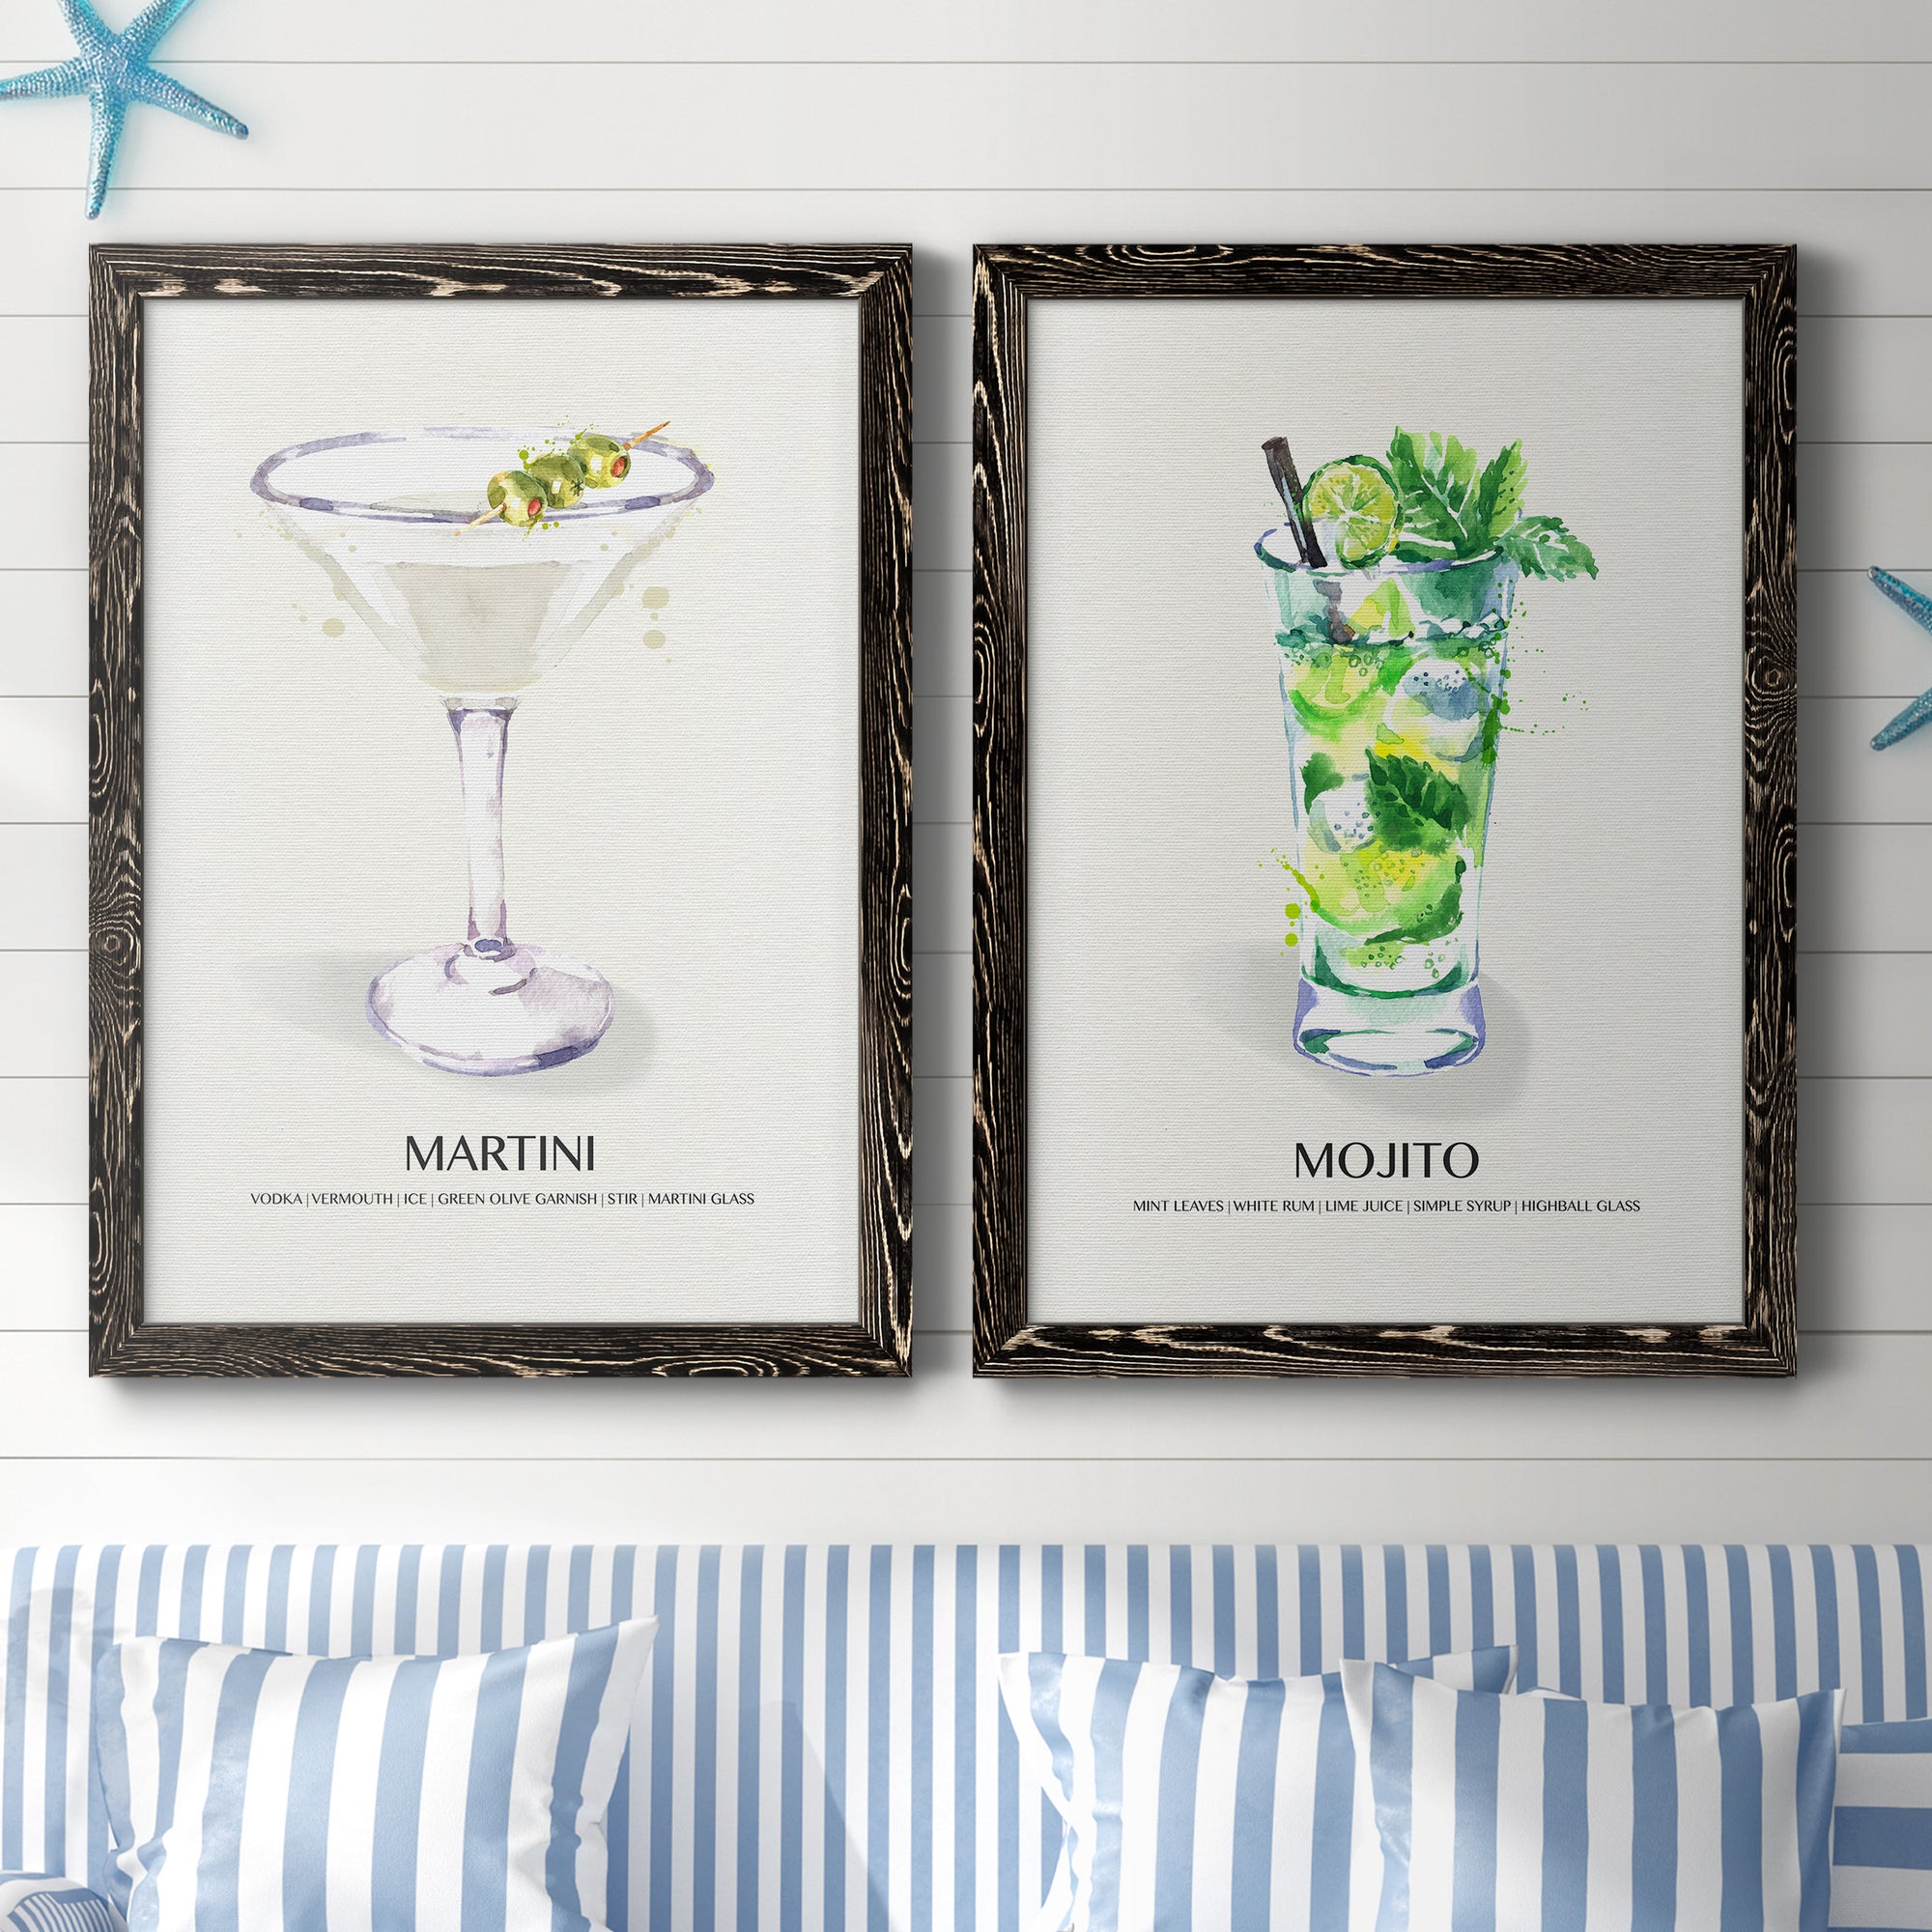 Martini- Premium Framed Canvas in Barnwood - Ready to Hang